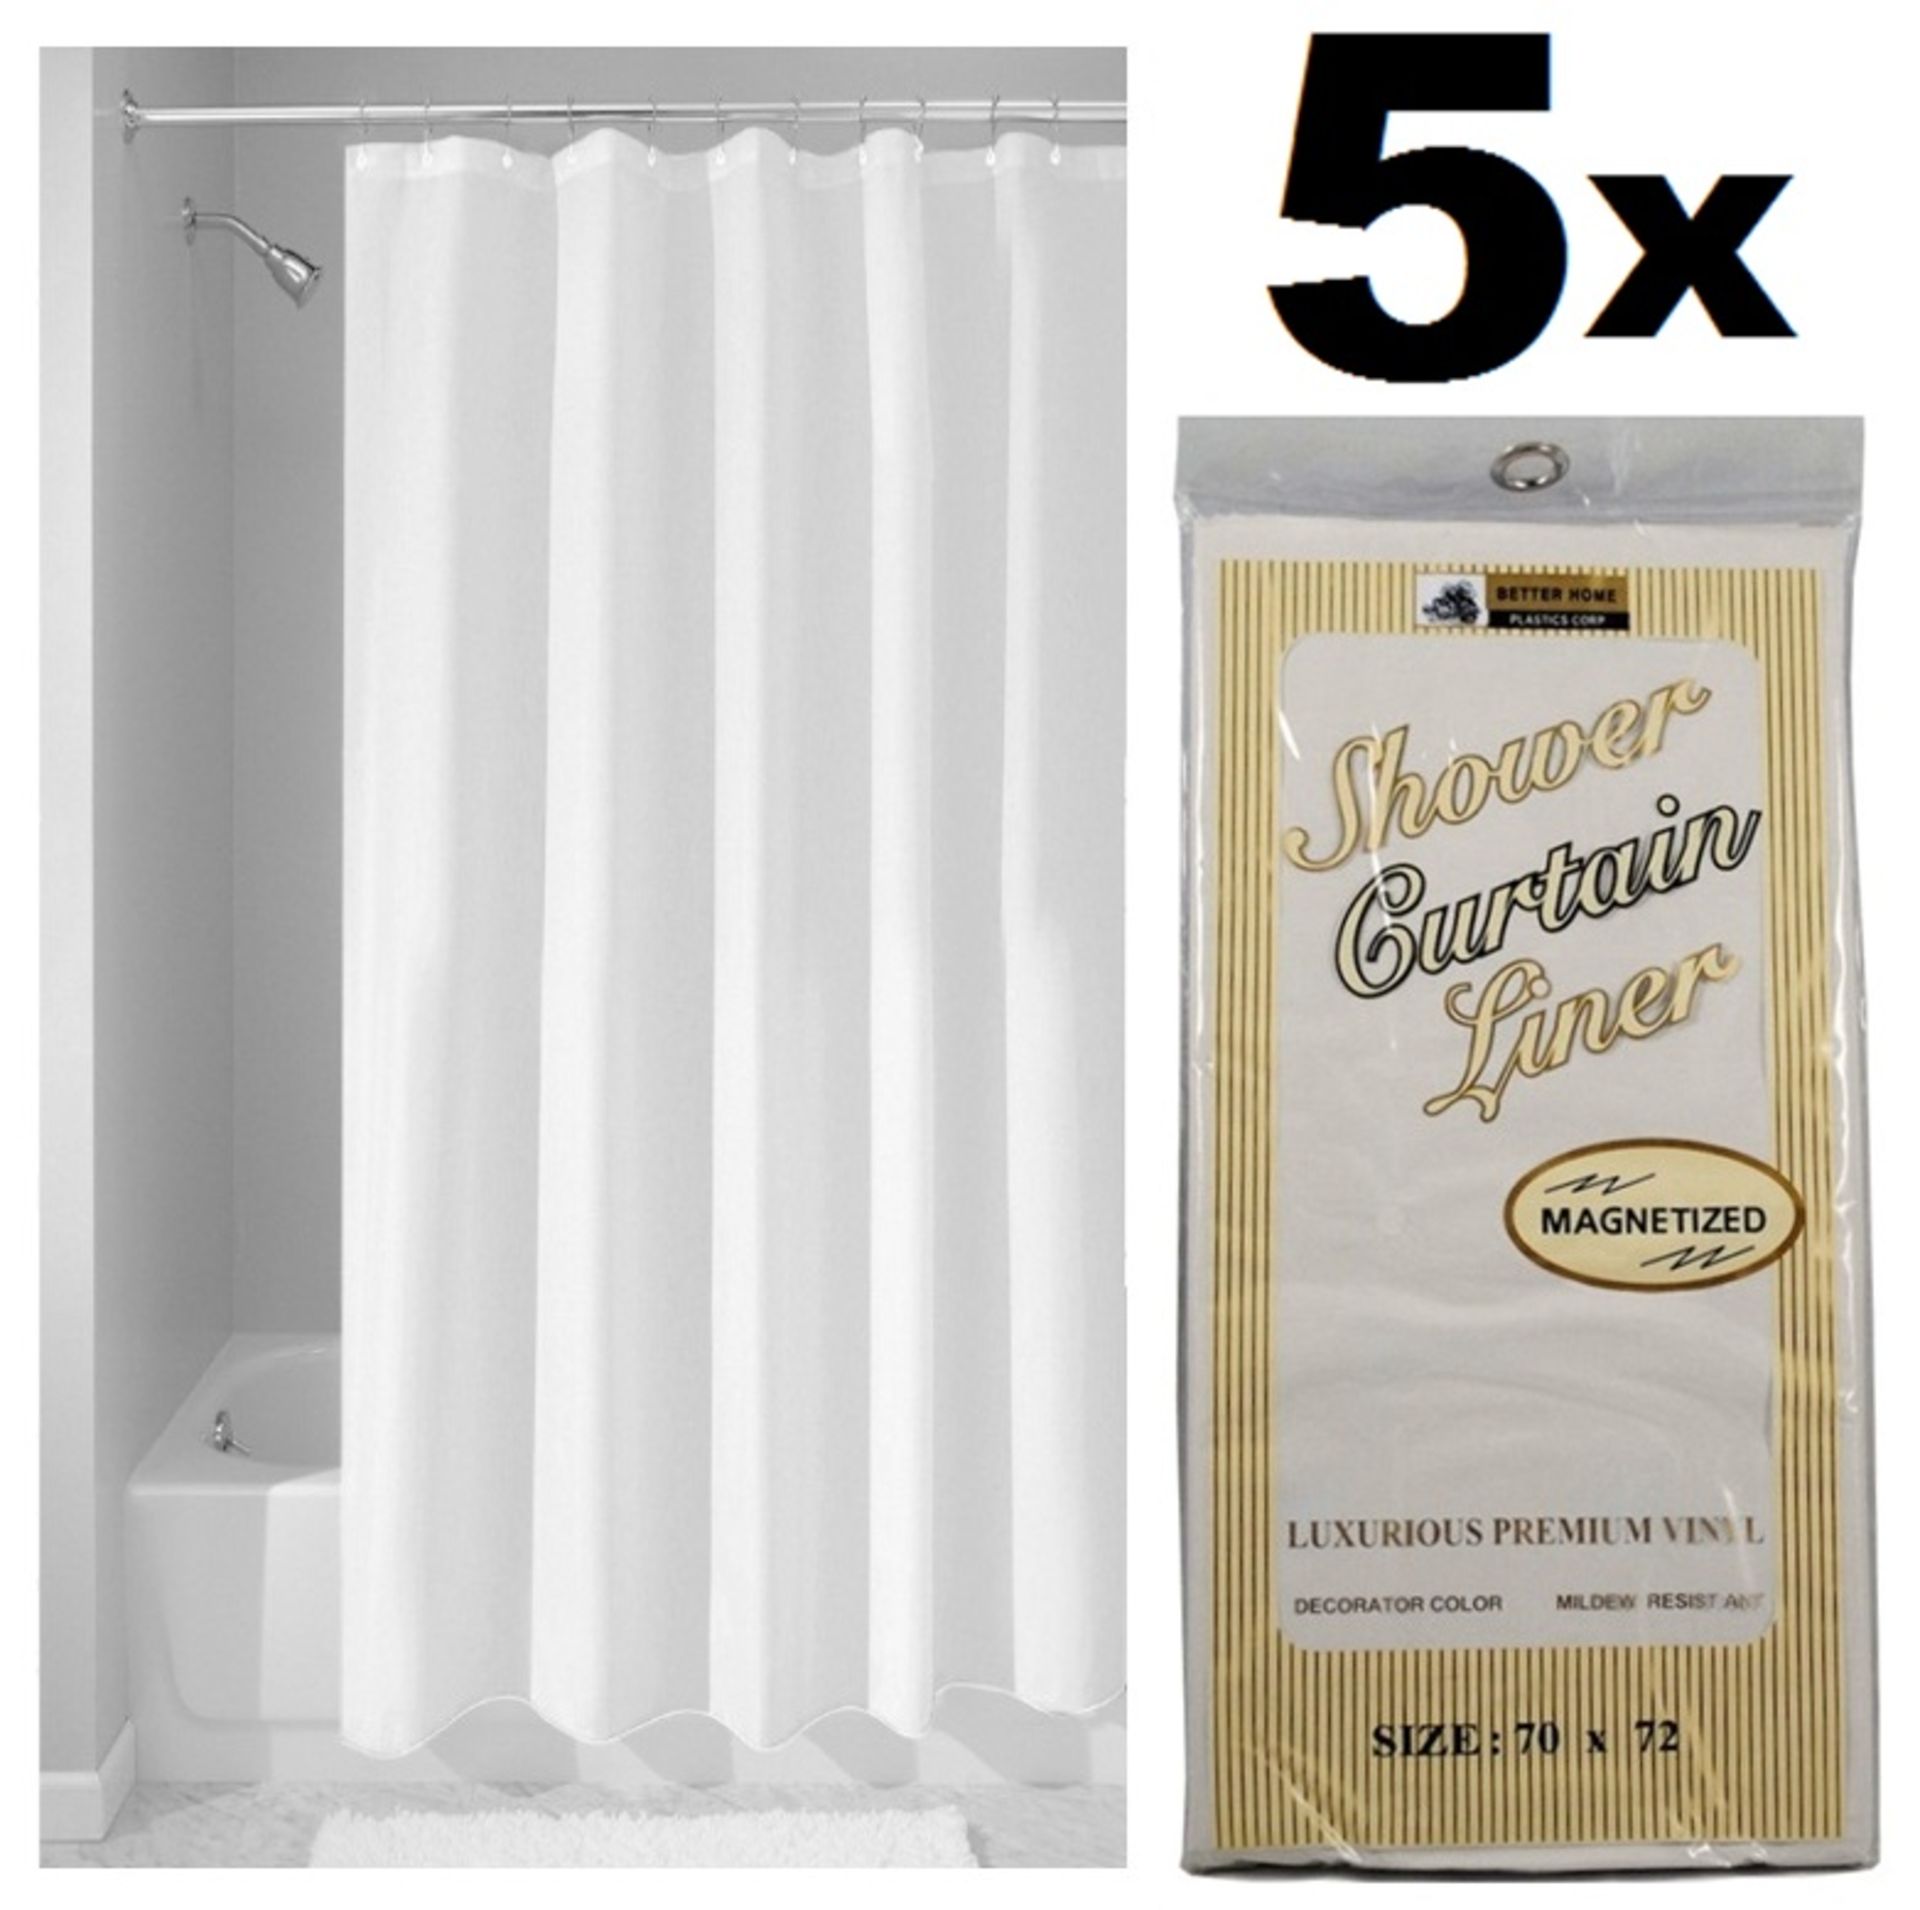 5 x SHOWER CURTAIN LINER weighted Keeps your shower curtain from damage fix inside your shower